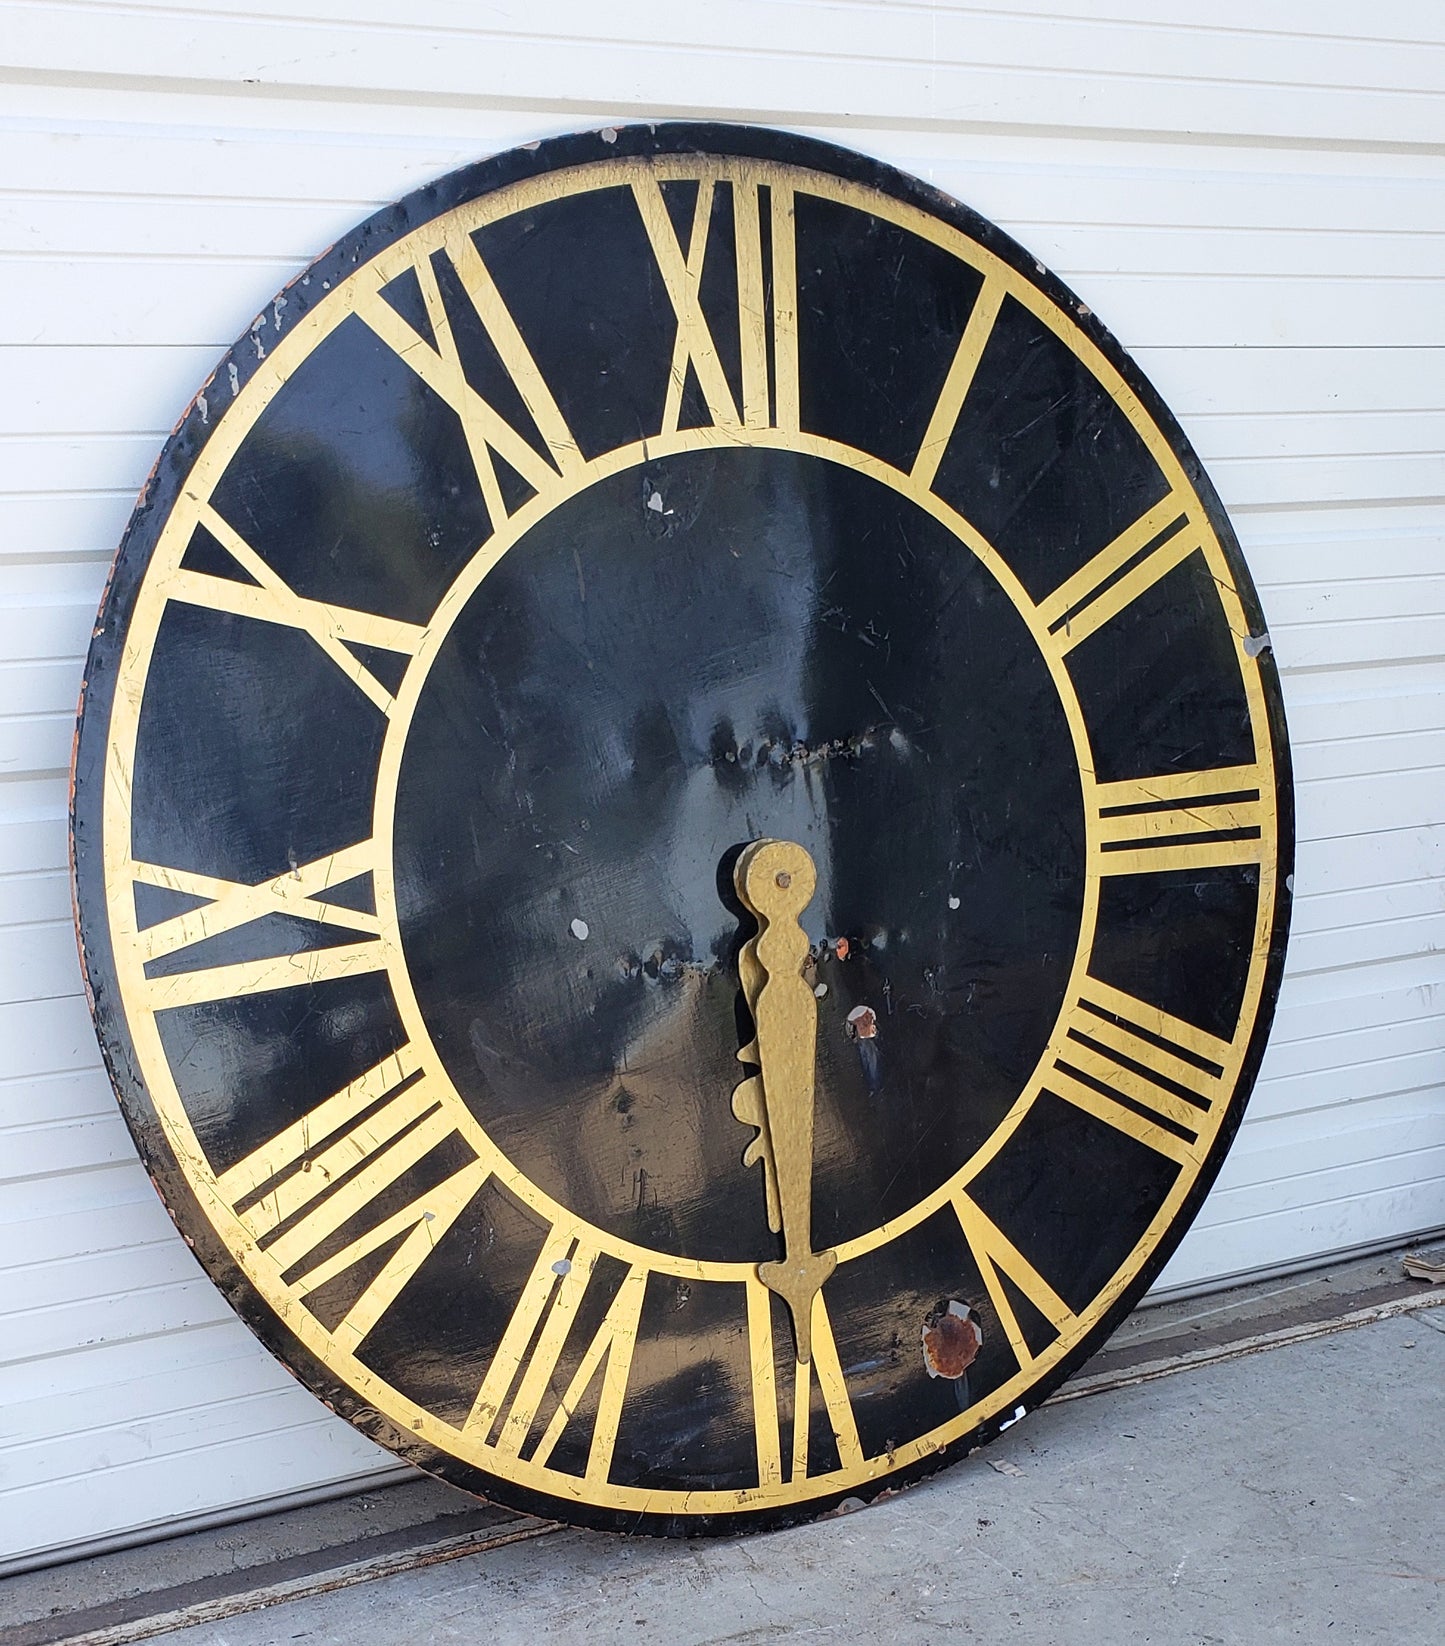 Round French Clock Face with Roman Numerals and Hands